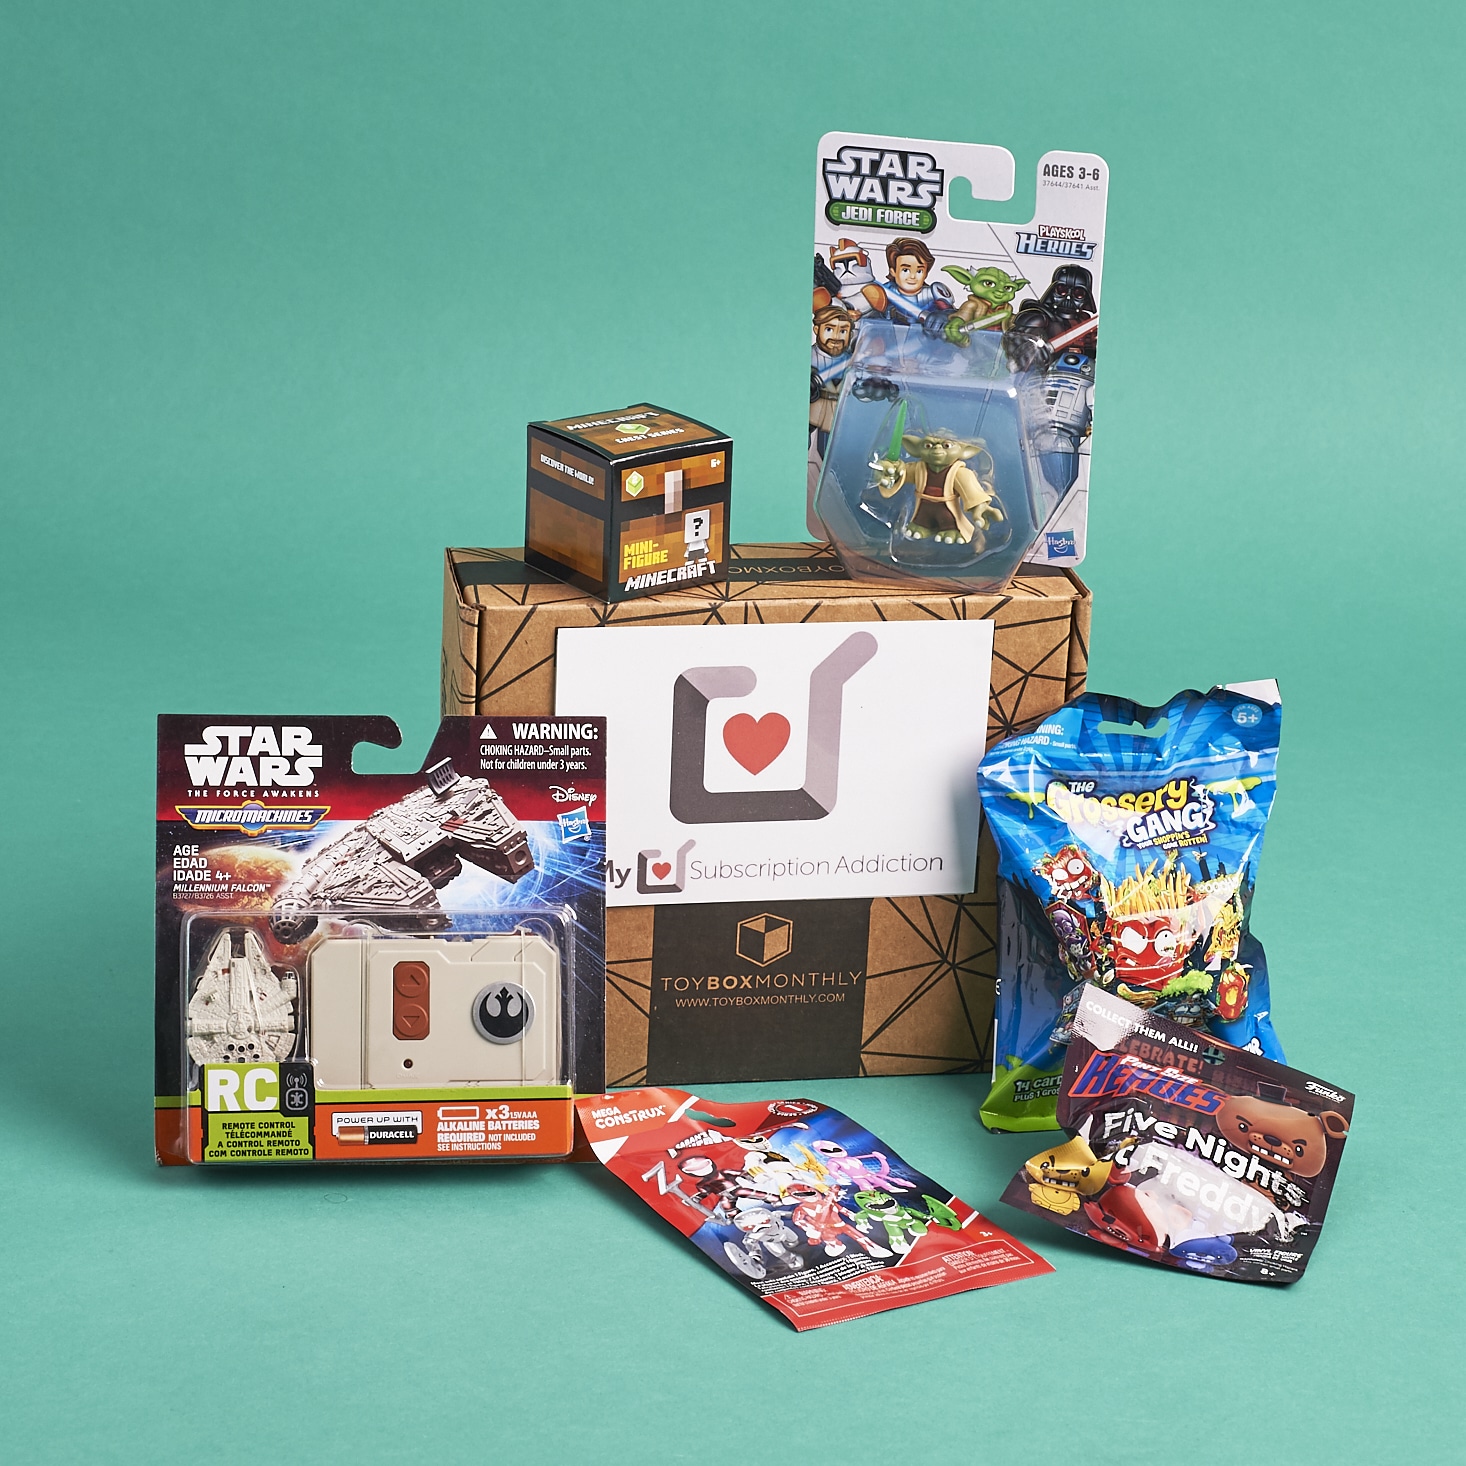 Toy Box Monthly Subscription Box Review – May 2017